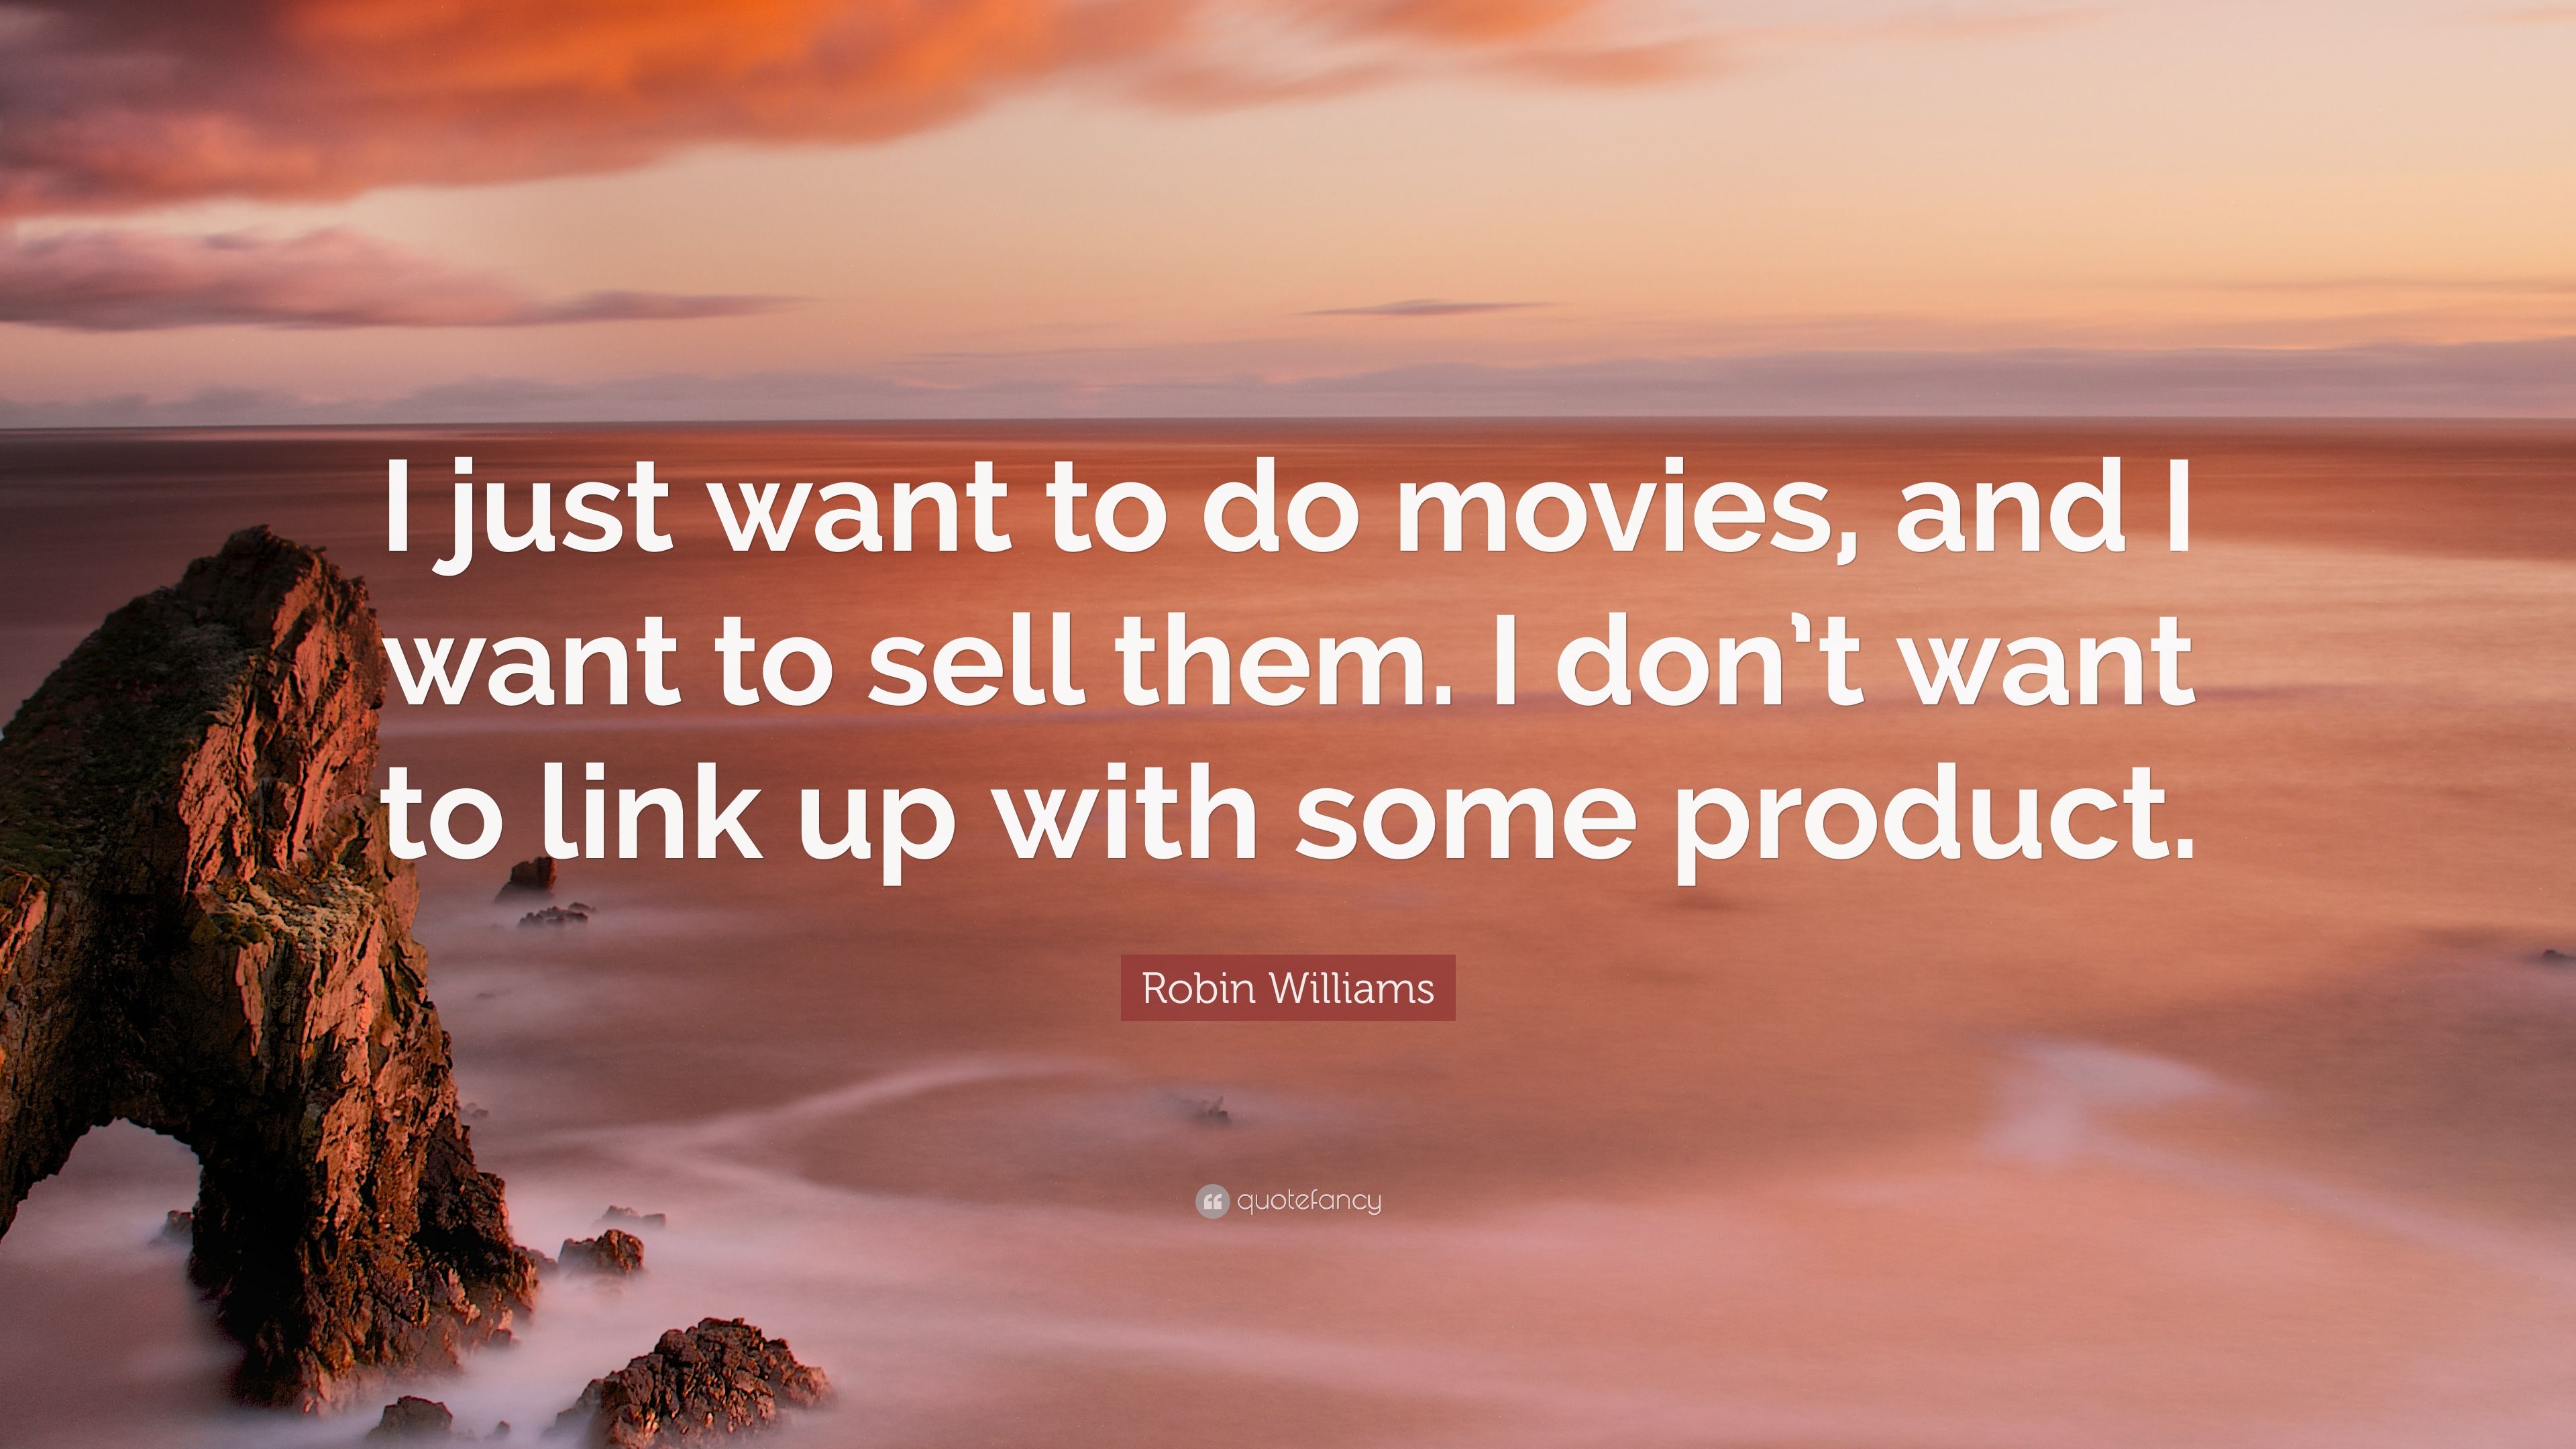 Robin Williams Quote: “I just want to do movies, and I want to